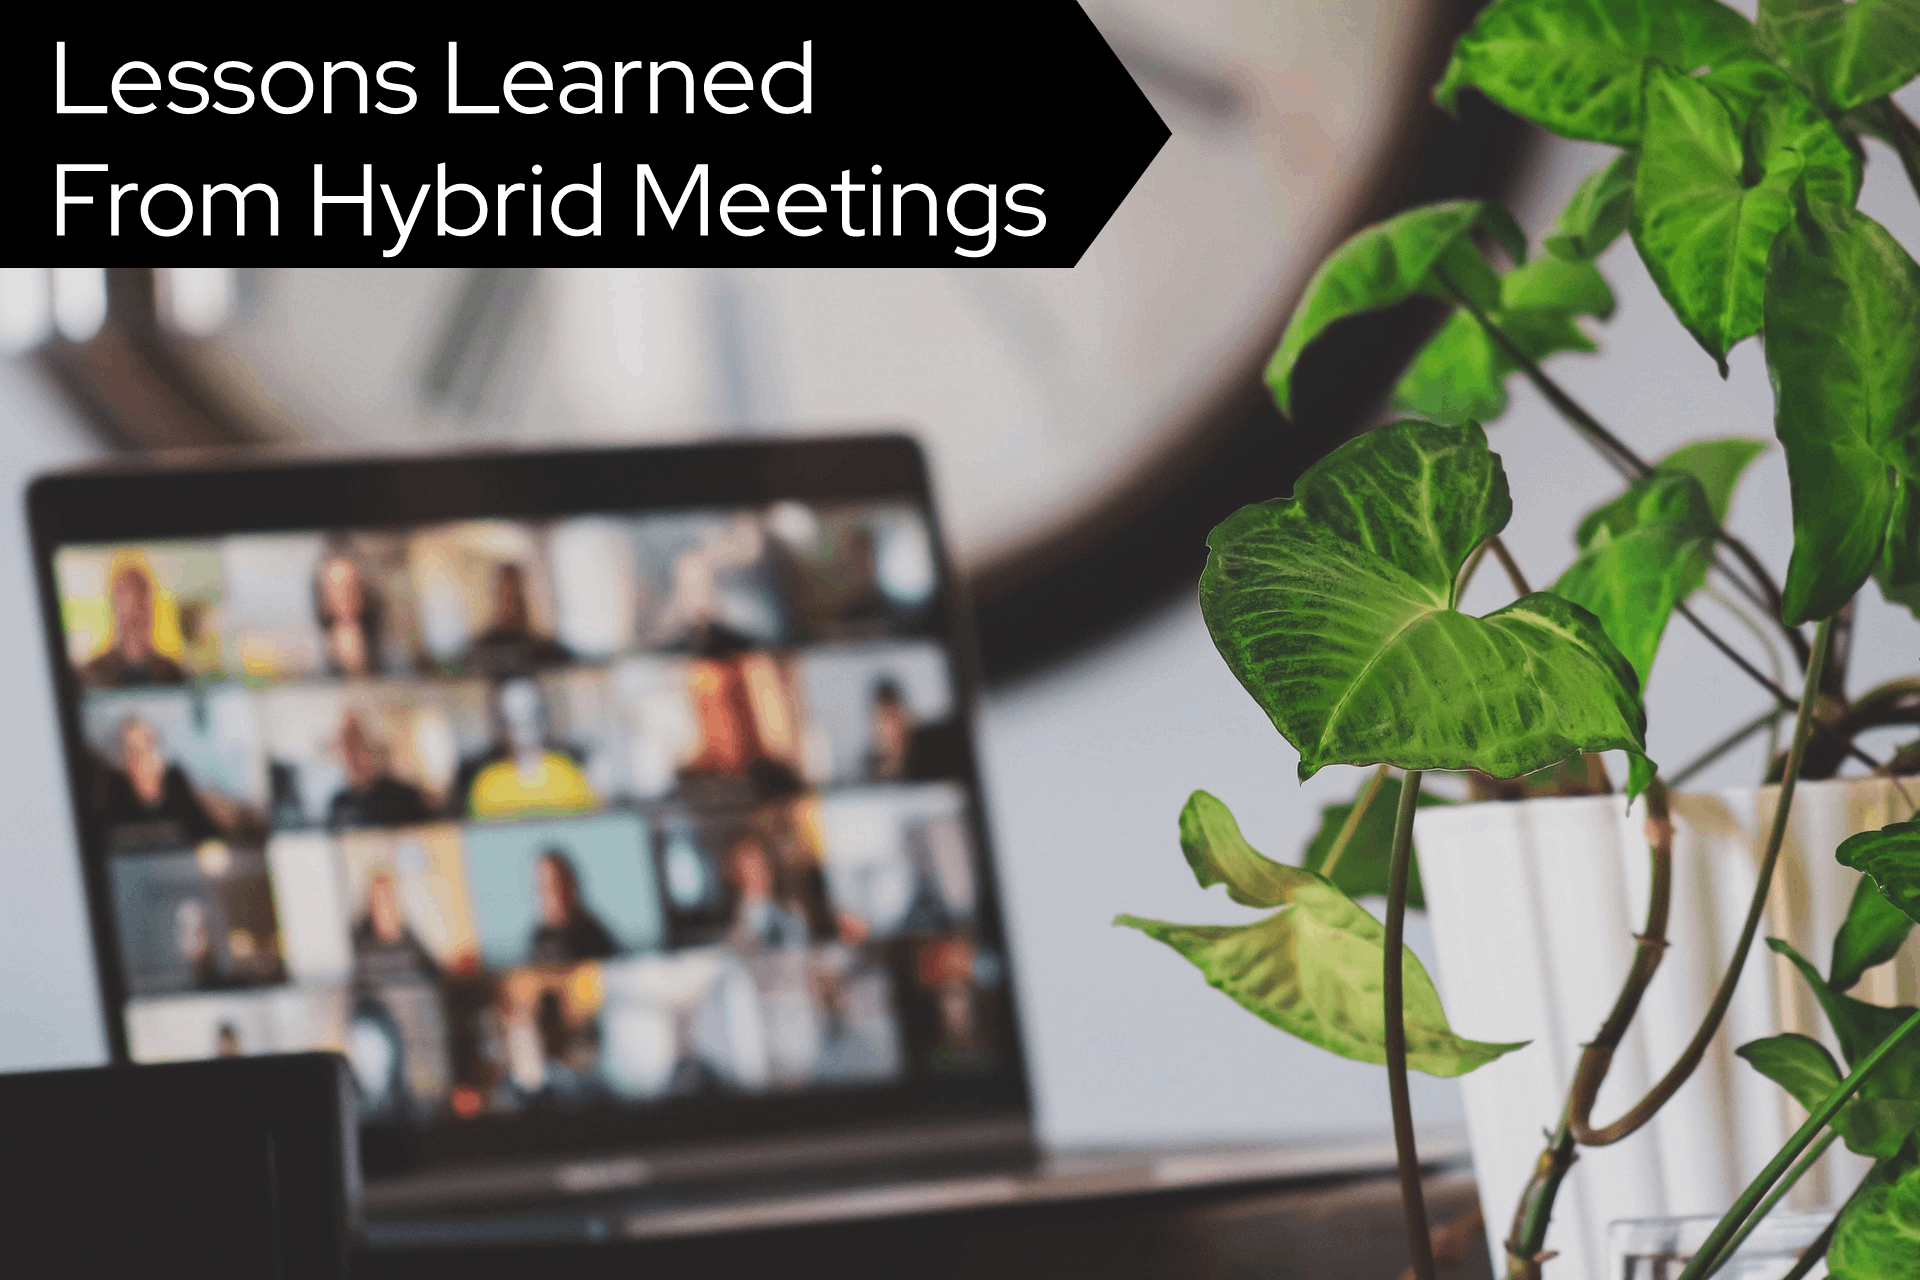 Lessons Learned from Hybrid Meetings